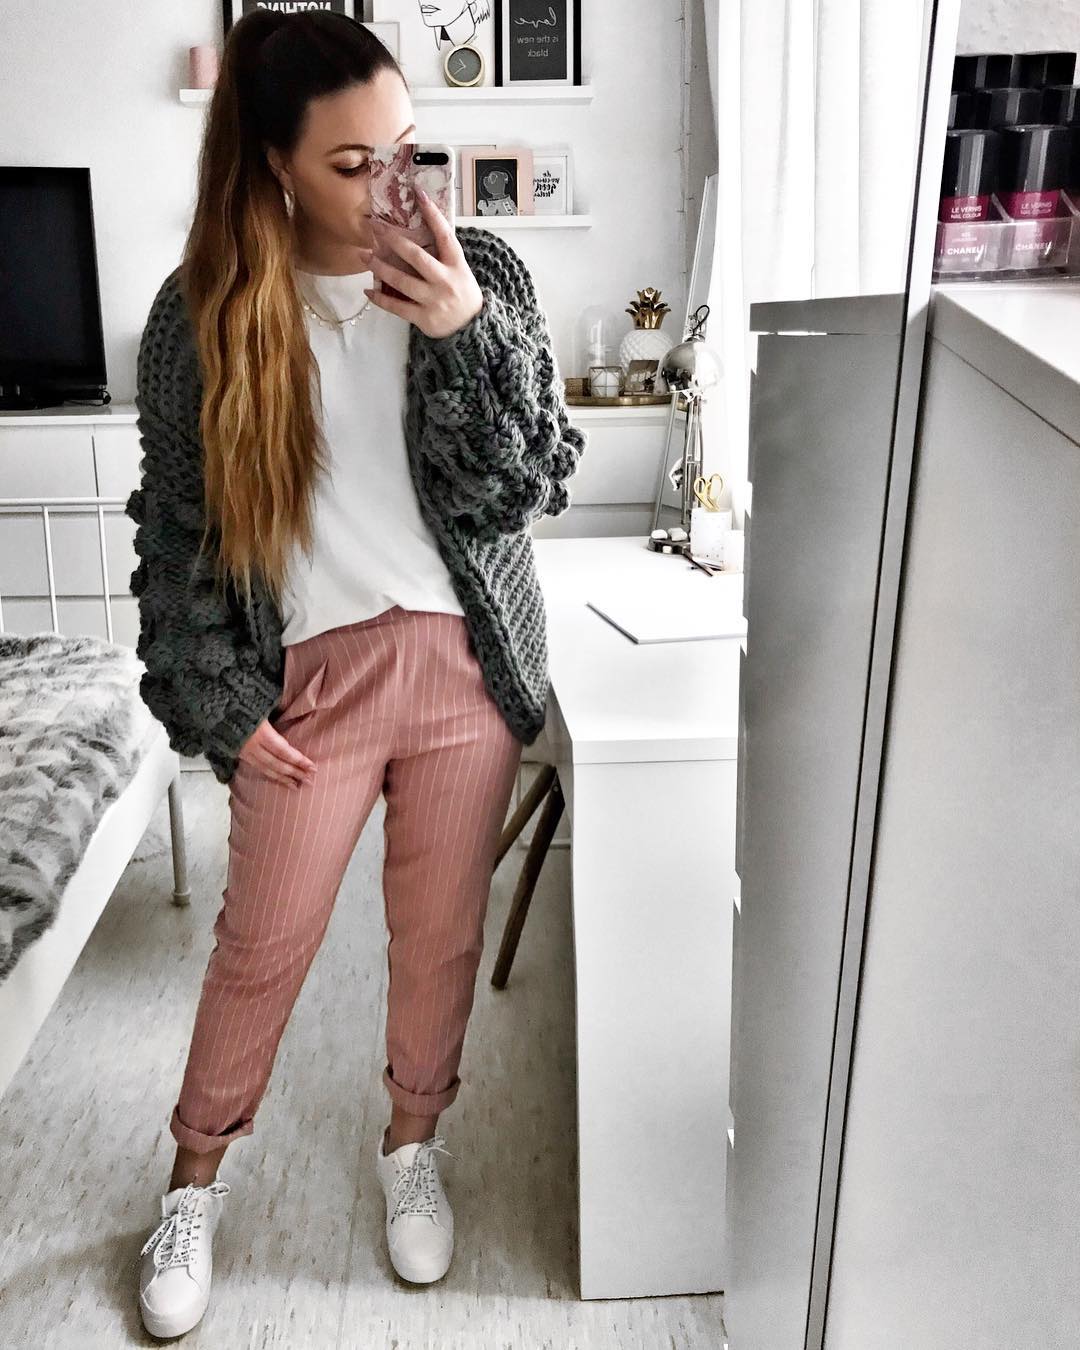 Favorite Pink Stripes Pant, White Top, Gray Bubble Sweater And White Sneakers